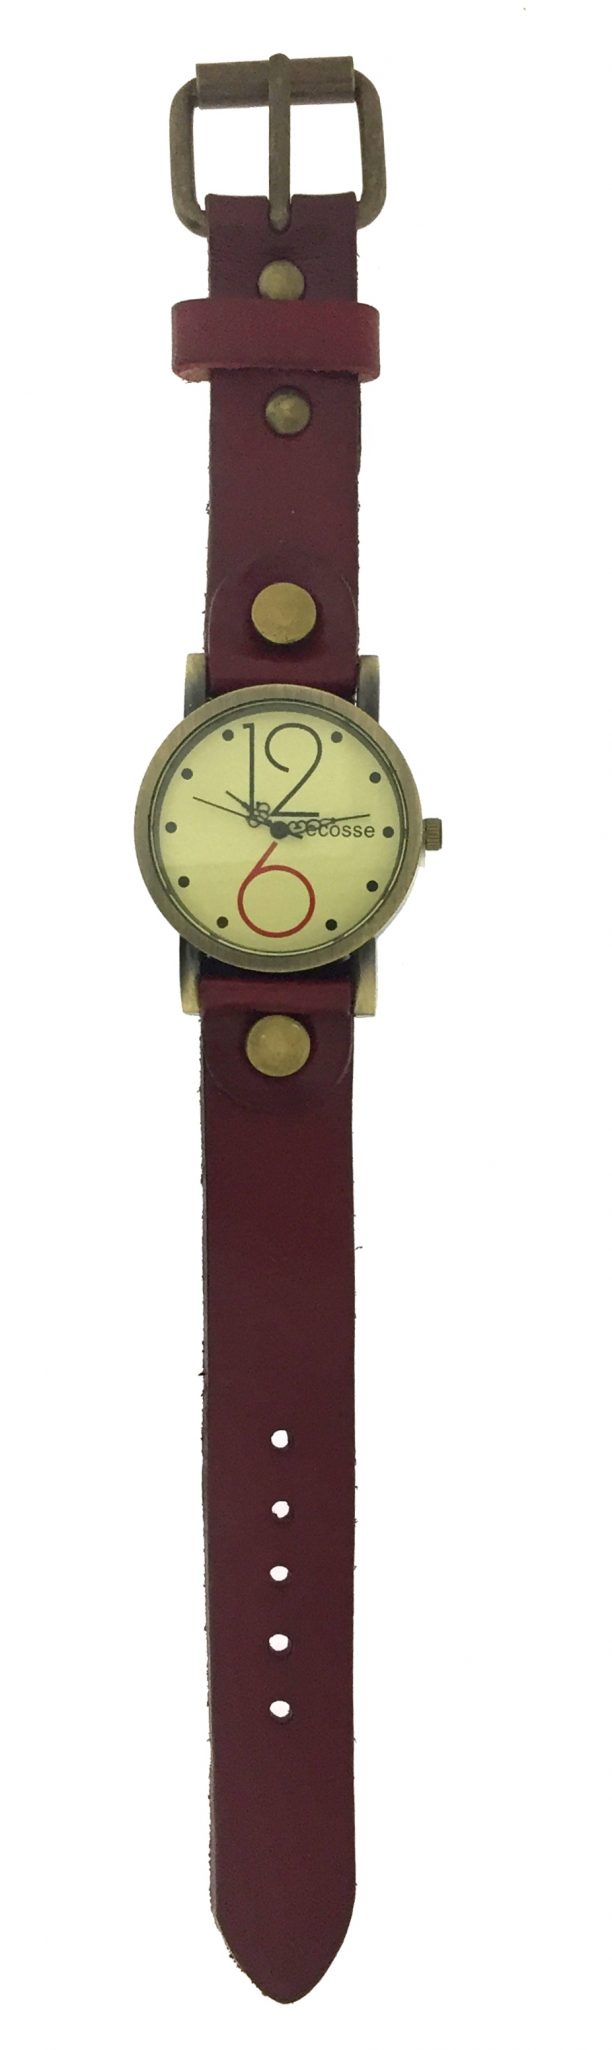 Watch with Strap Detail